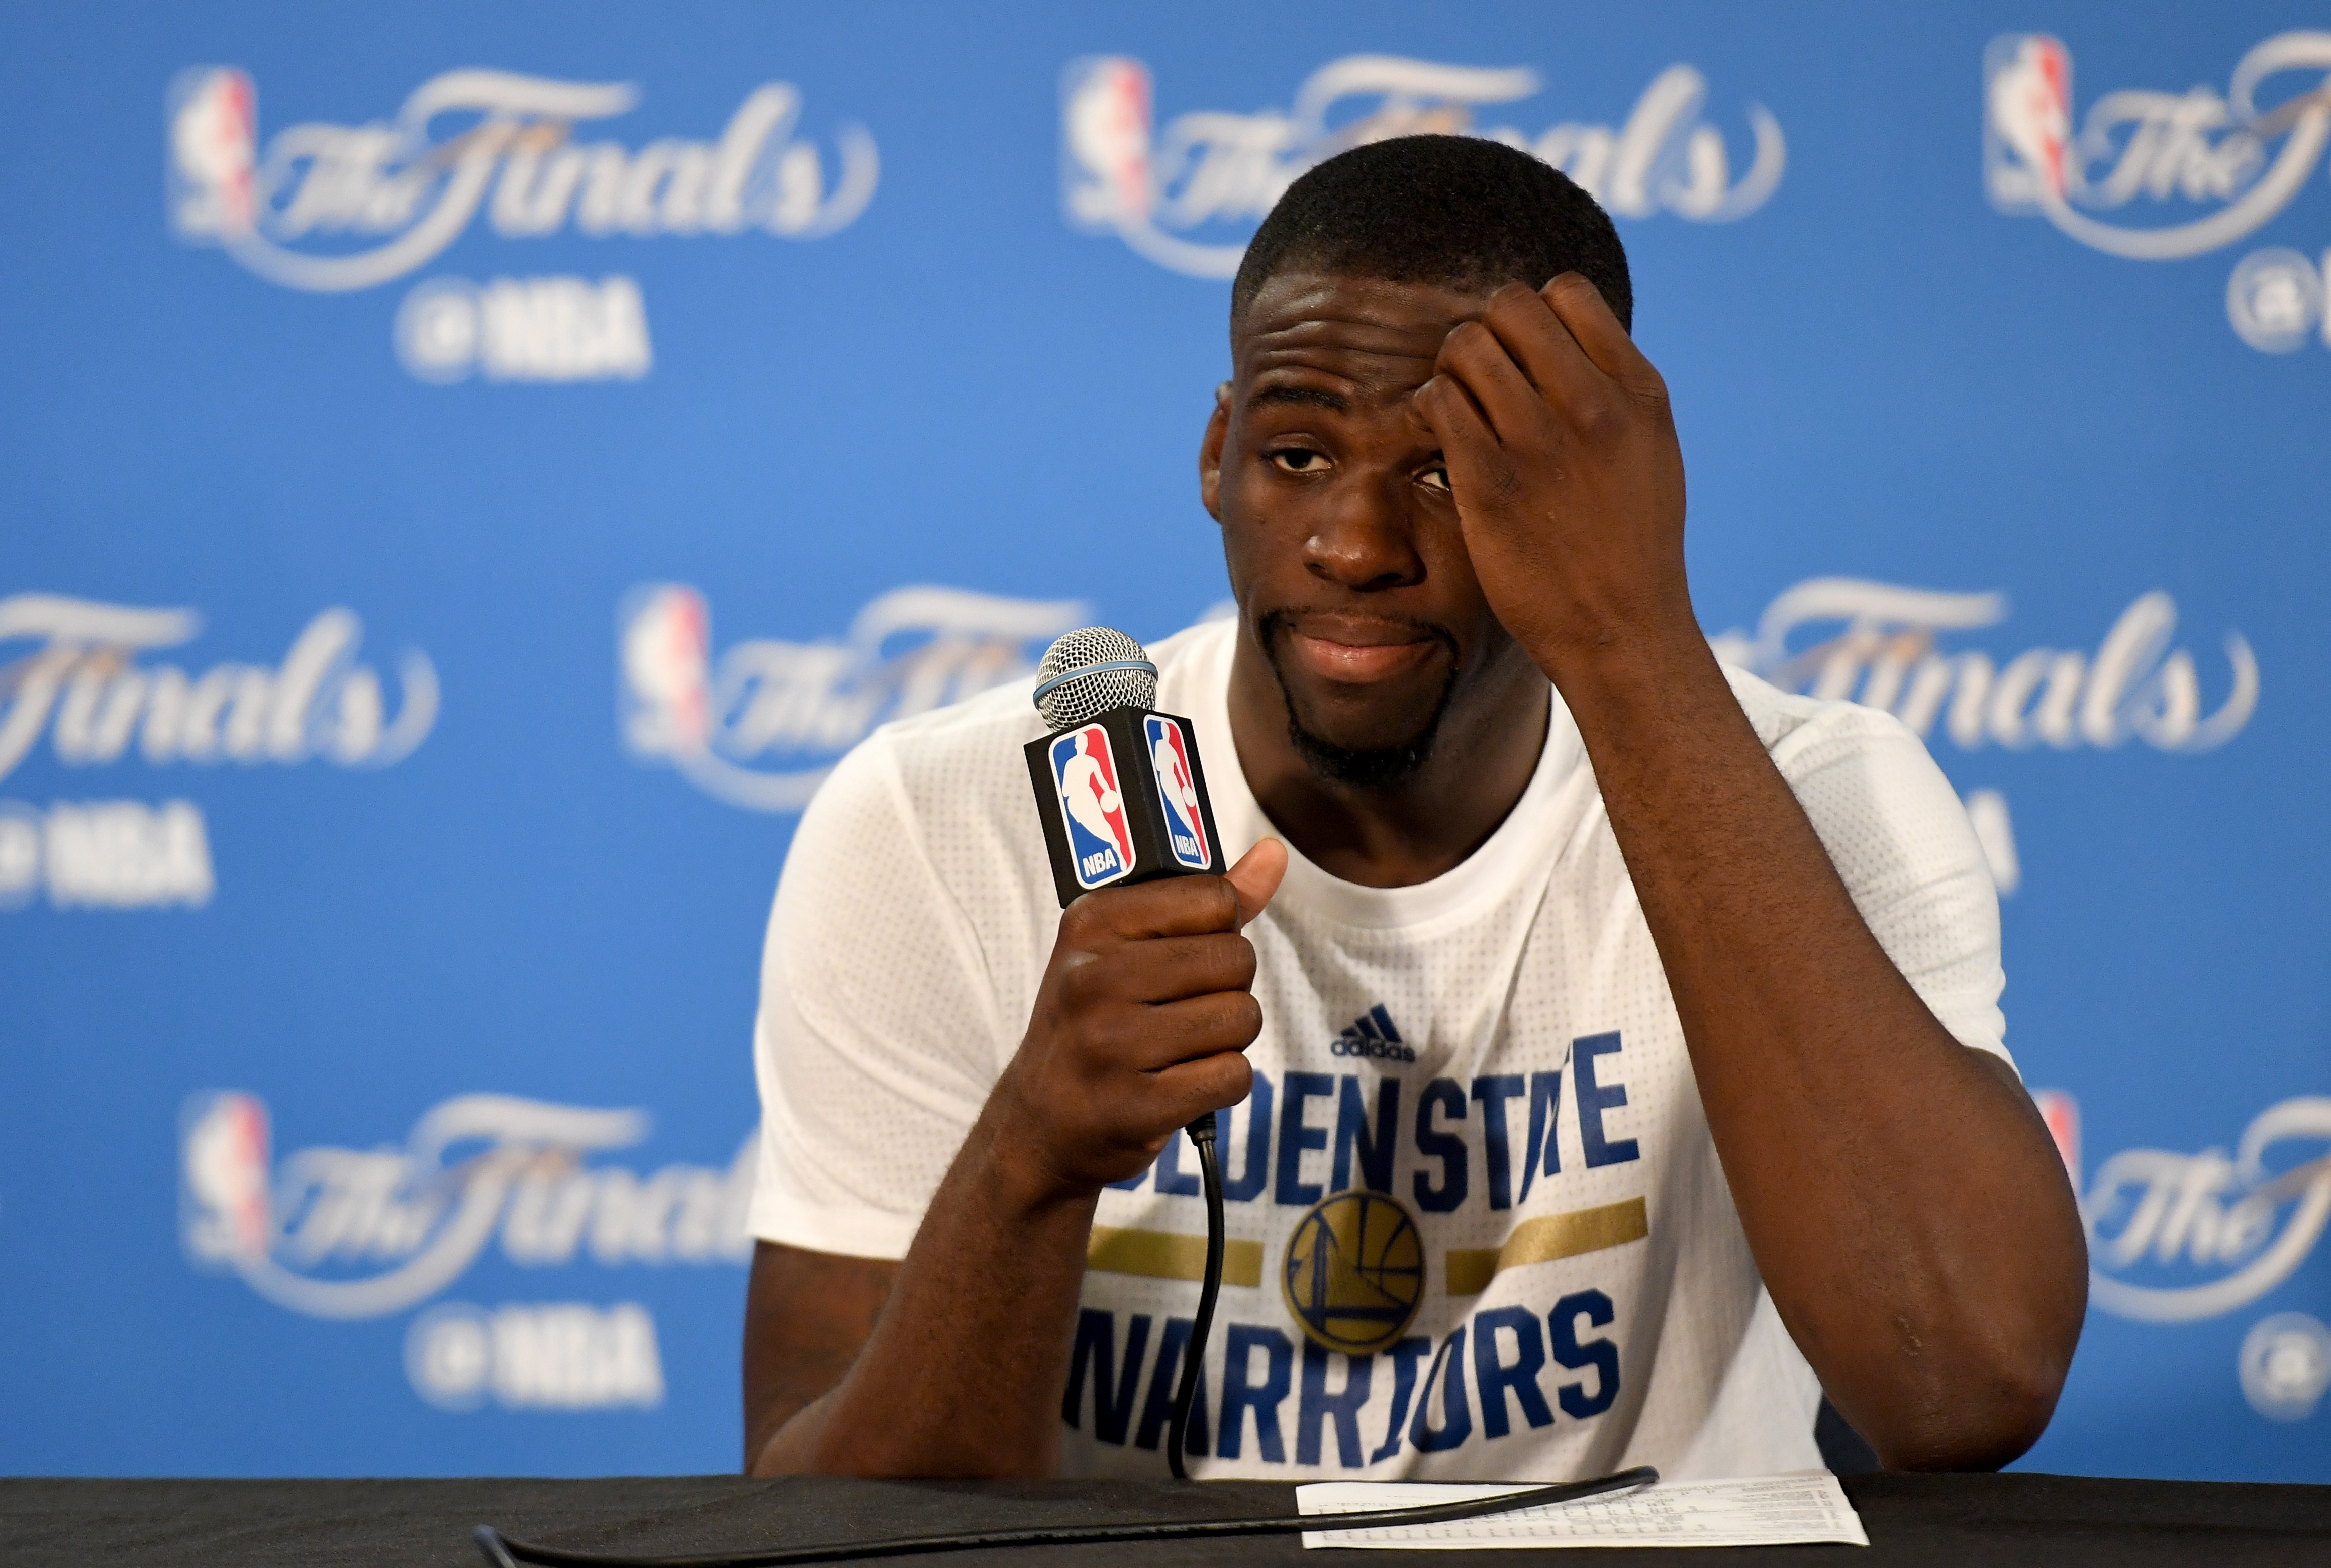 Draymond Green of the Golden State Warriors speaks to members of the media after being defeated by the Cleveland Cavaliers in Game 7 of the 2016 NBA Finals at ORACLE Arena on June 19, 2016 in Oakland, California. (Getty)